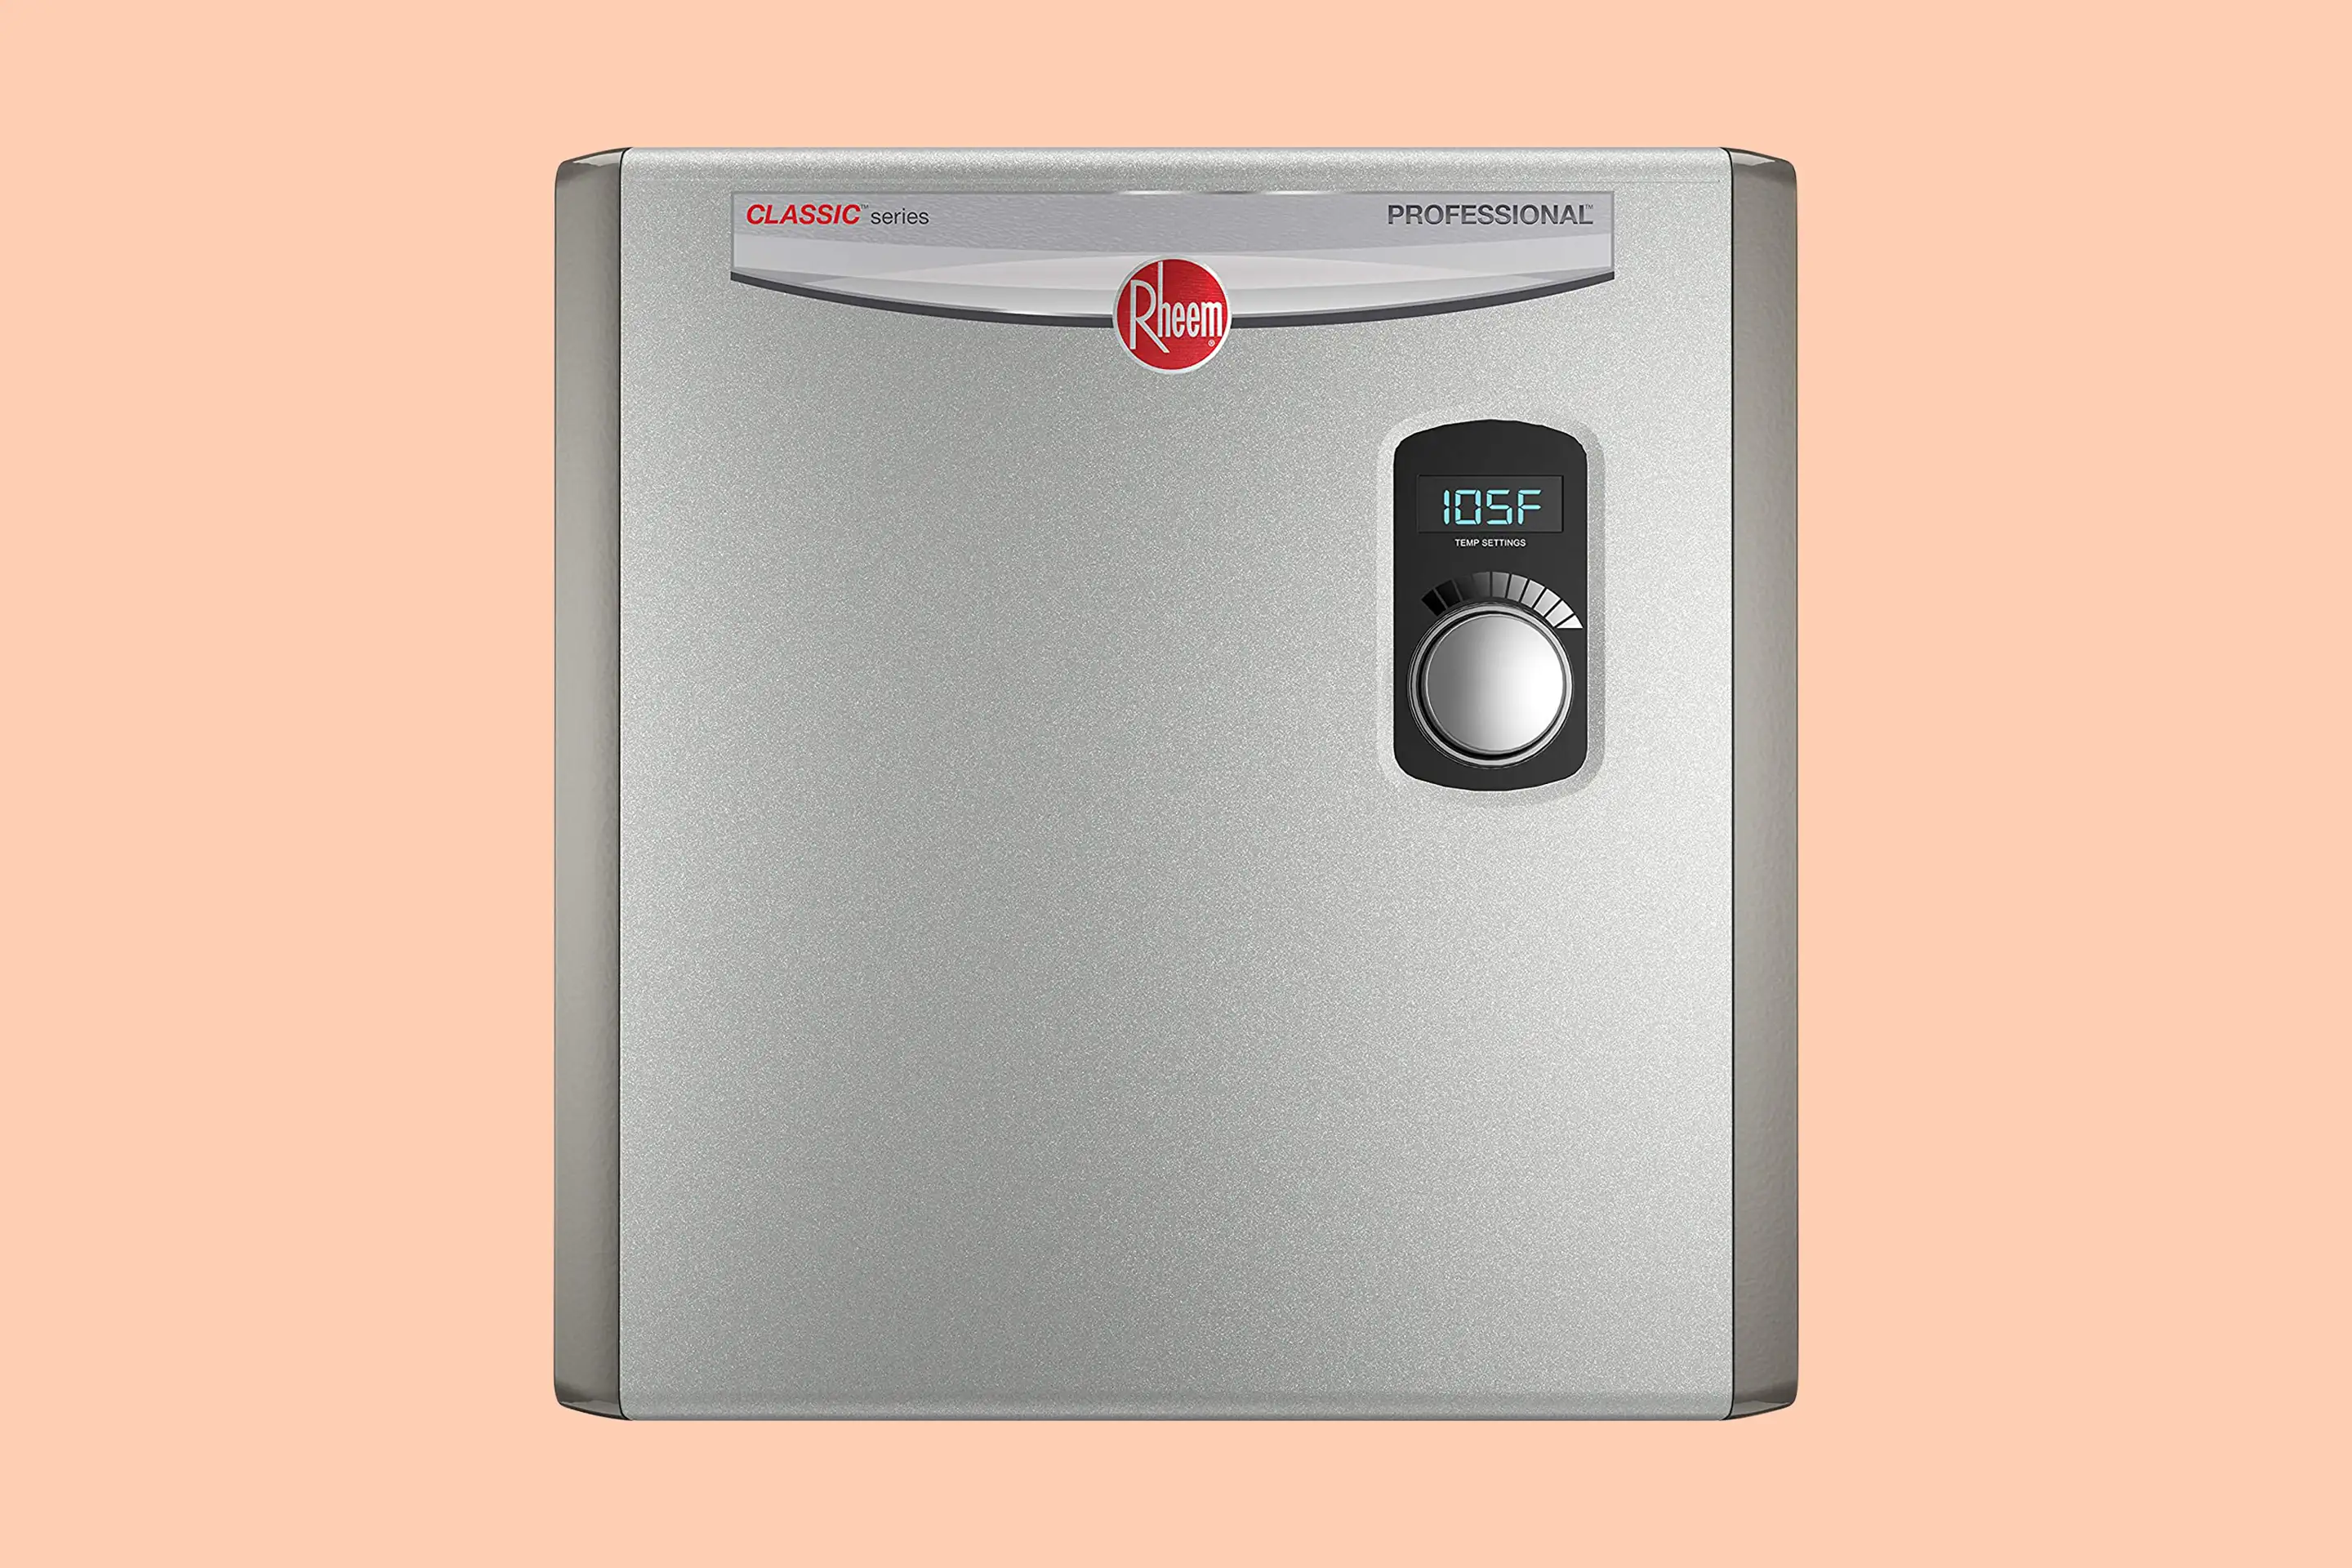 Silver Water Heater With Dial and Digital Temperature Display